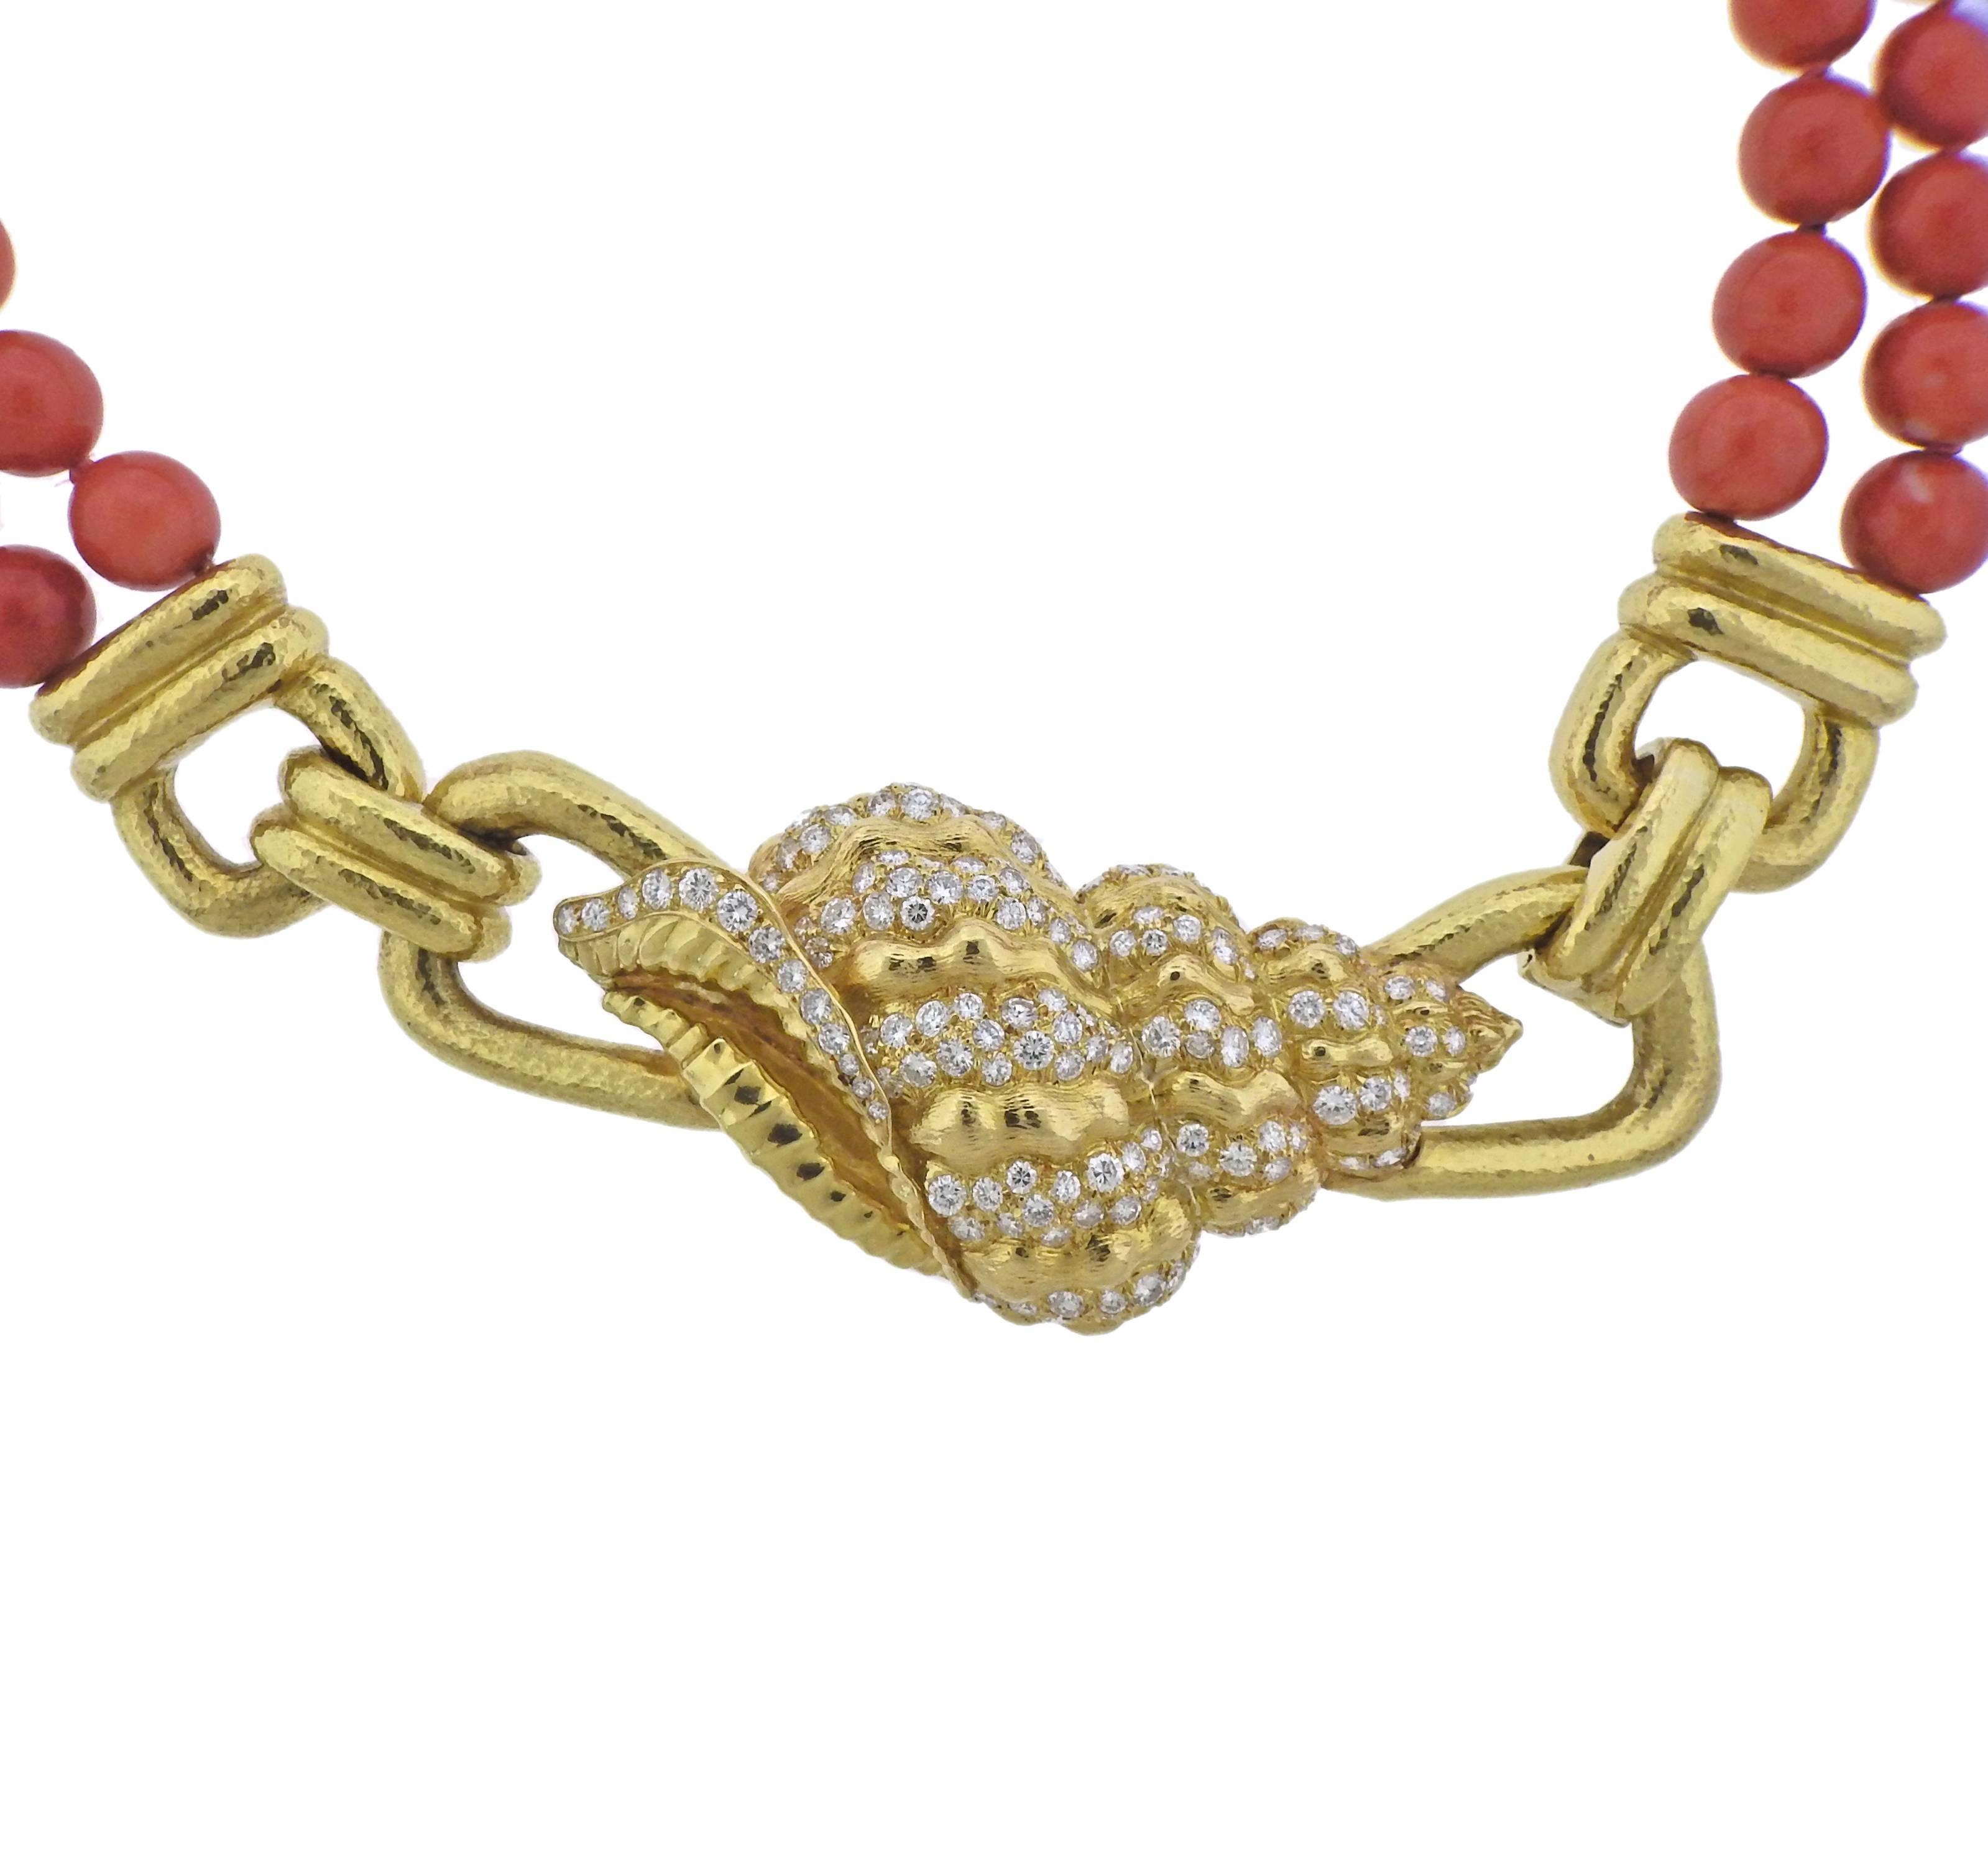 18k yellow gold necklace, crafted by David Webb, featuring Shell motif clasp, decorated with approx. 3.50ctw in GH/VS diamonds, and two strands of 7.5mm - 9.5mm  coral beads. Necklace is 17